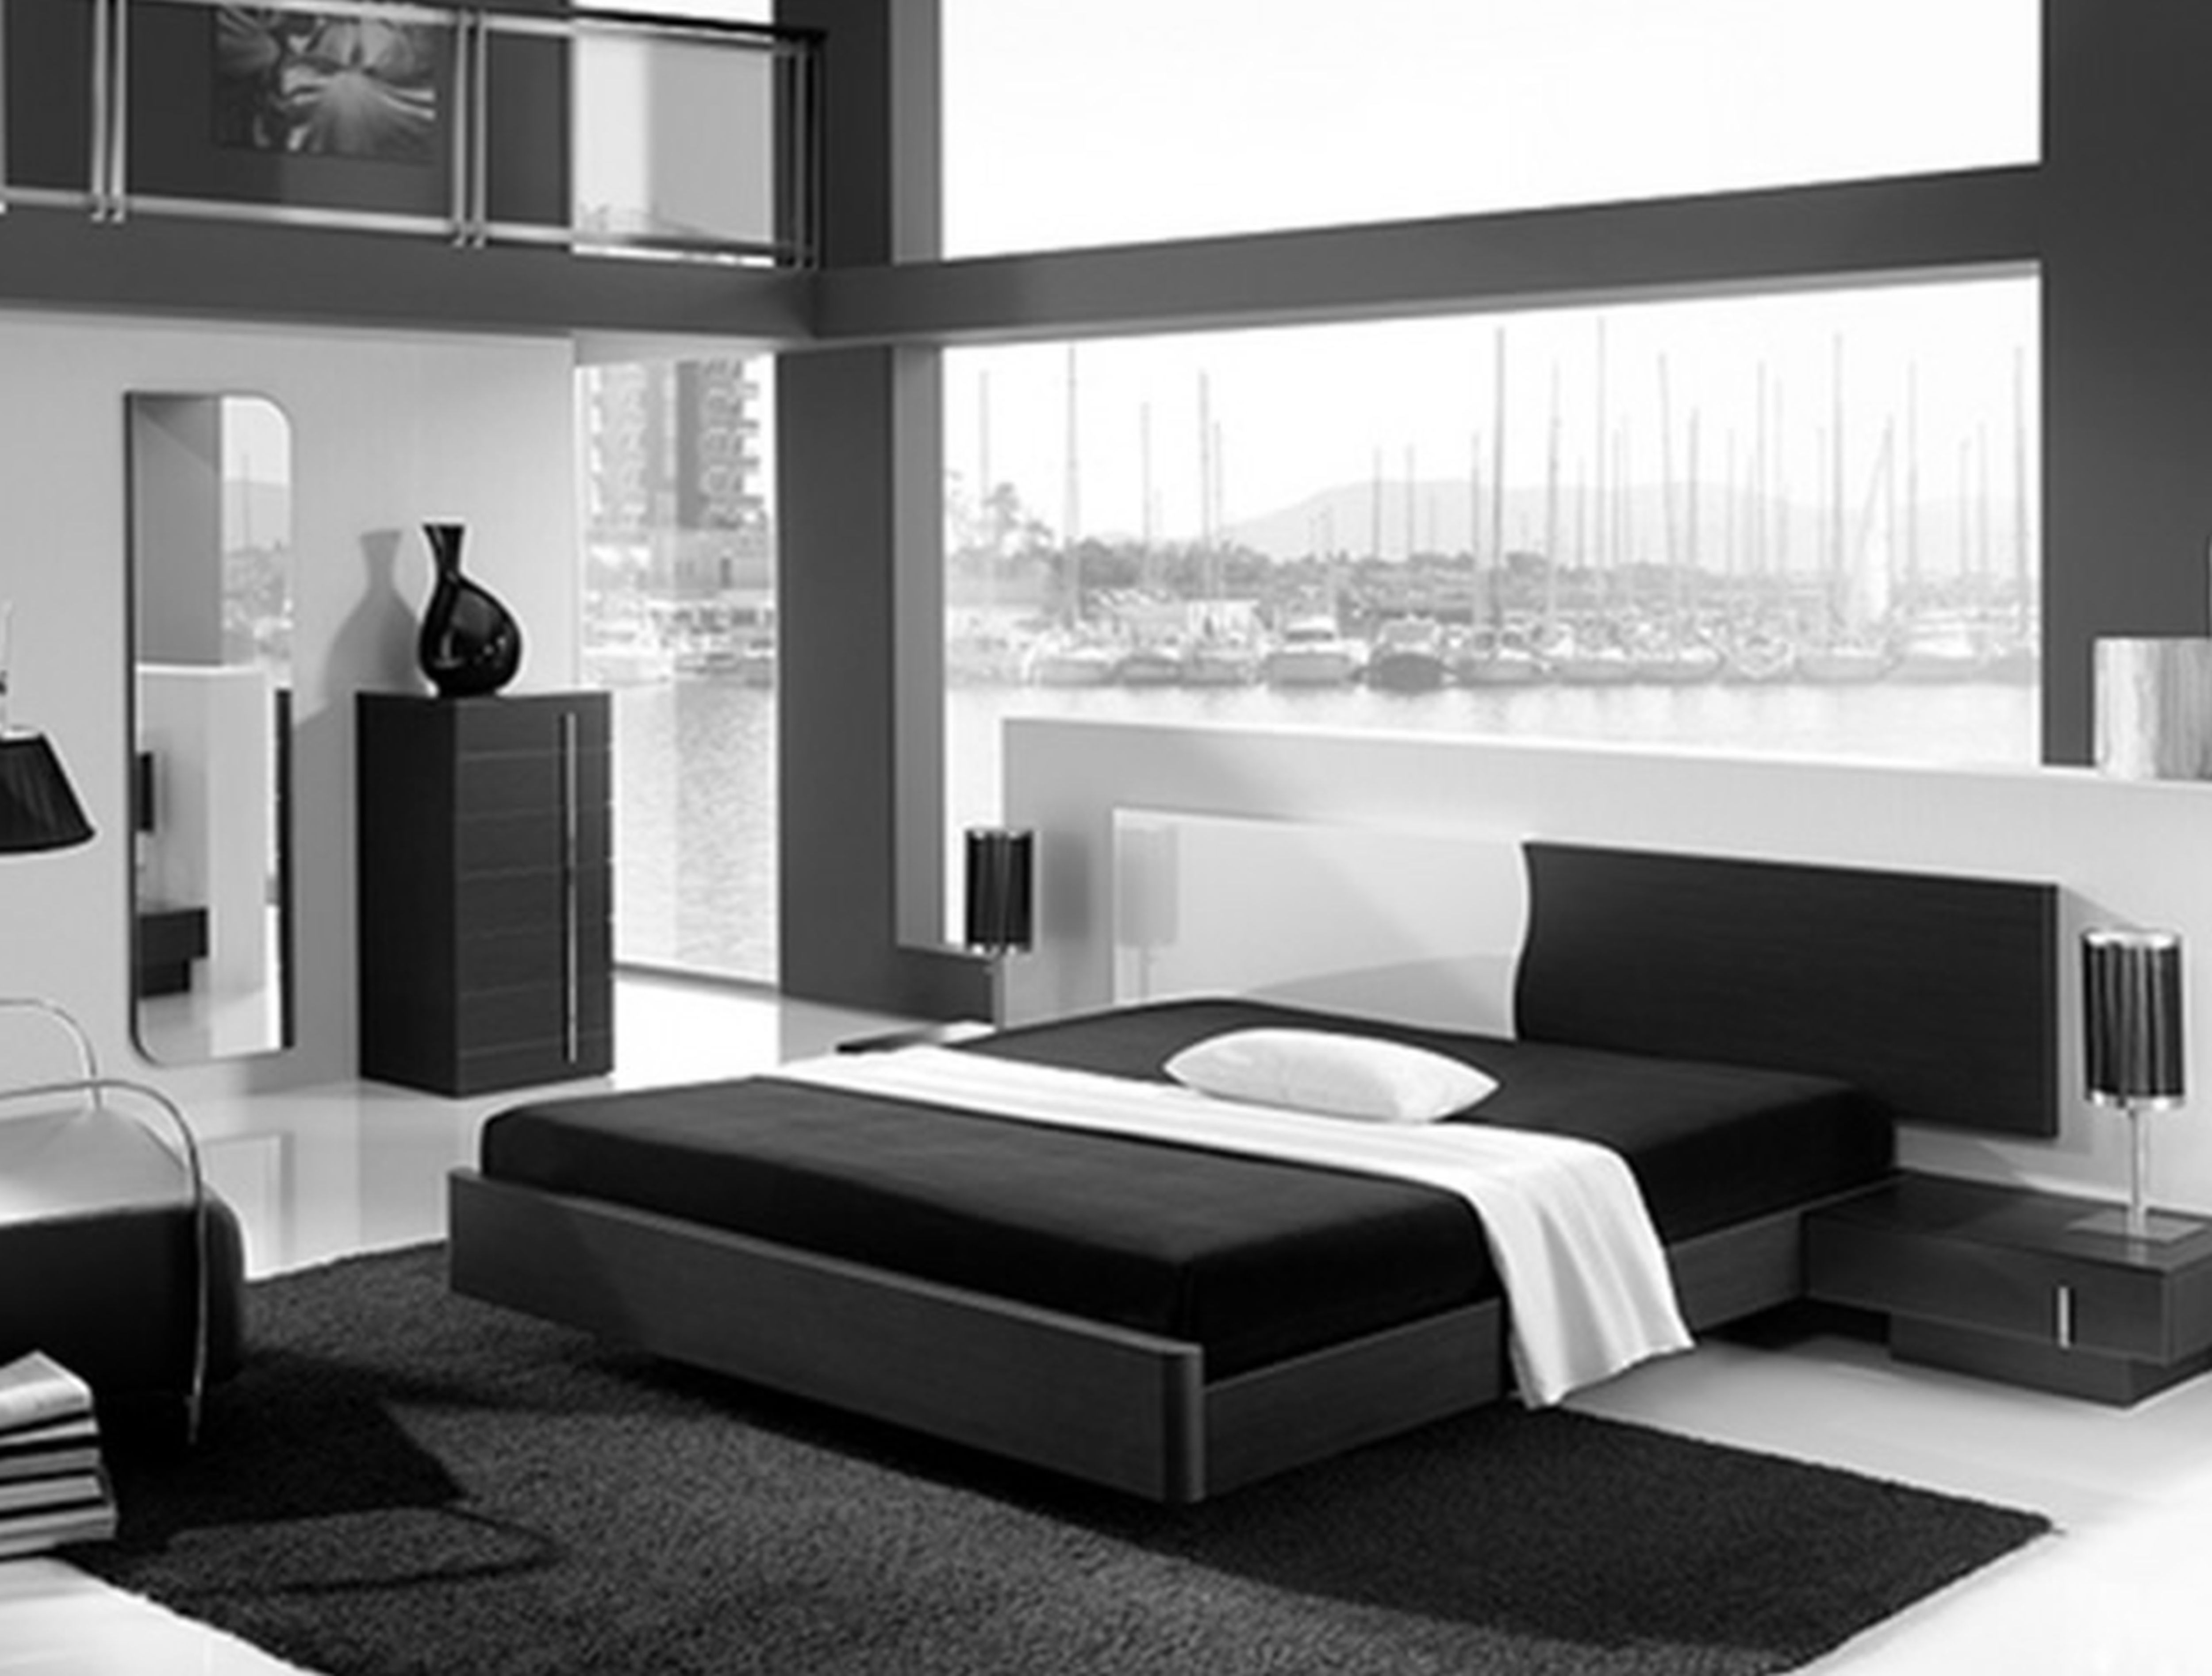 Black And White Modern Bedroom Furniture Inspiring Home Decoration within sizing 5000 X 3788